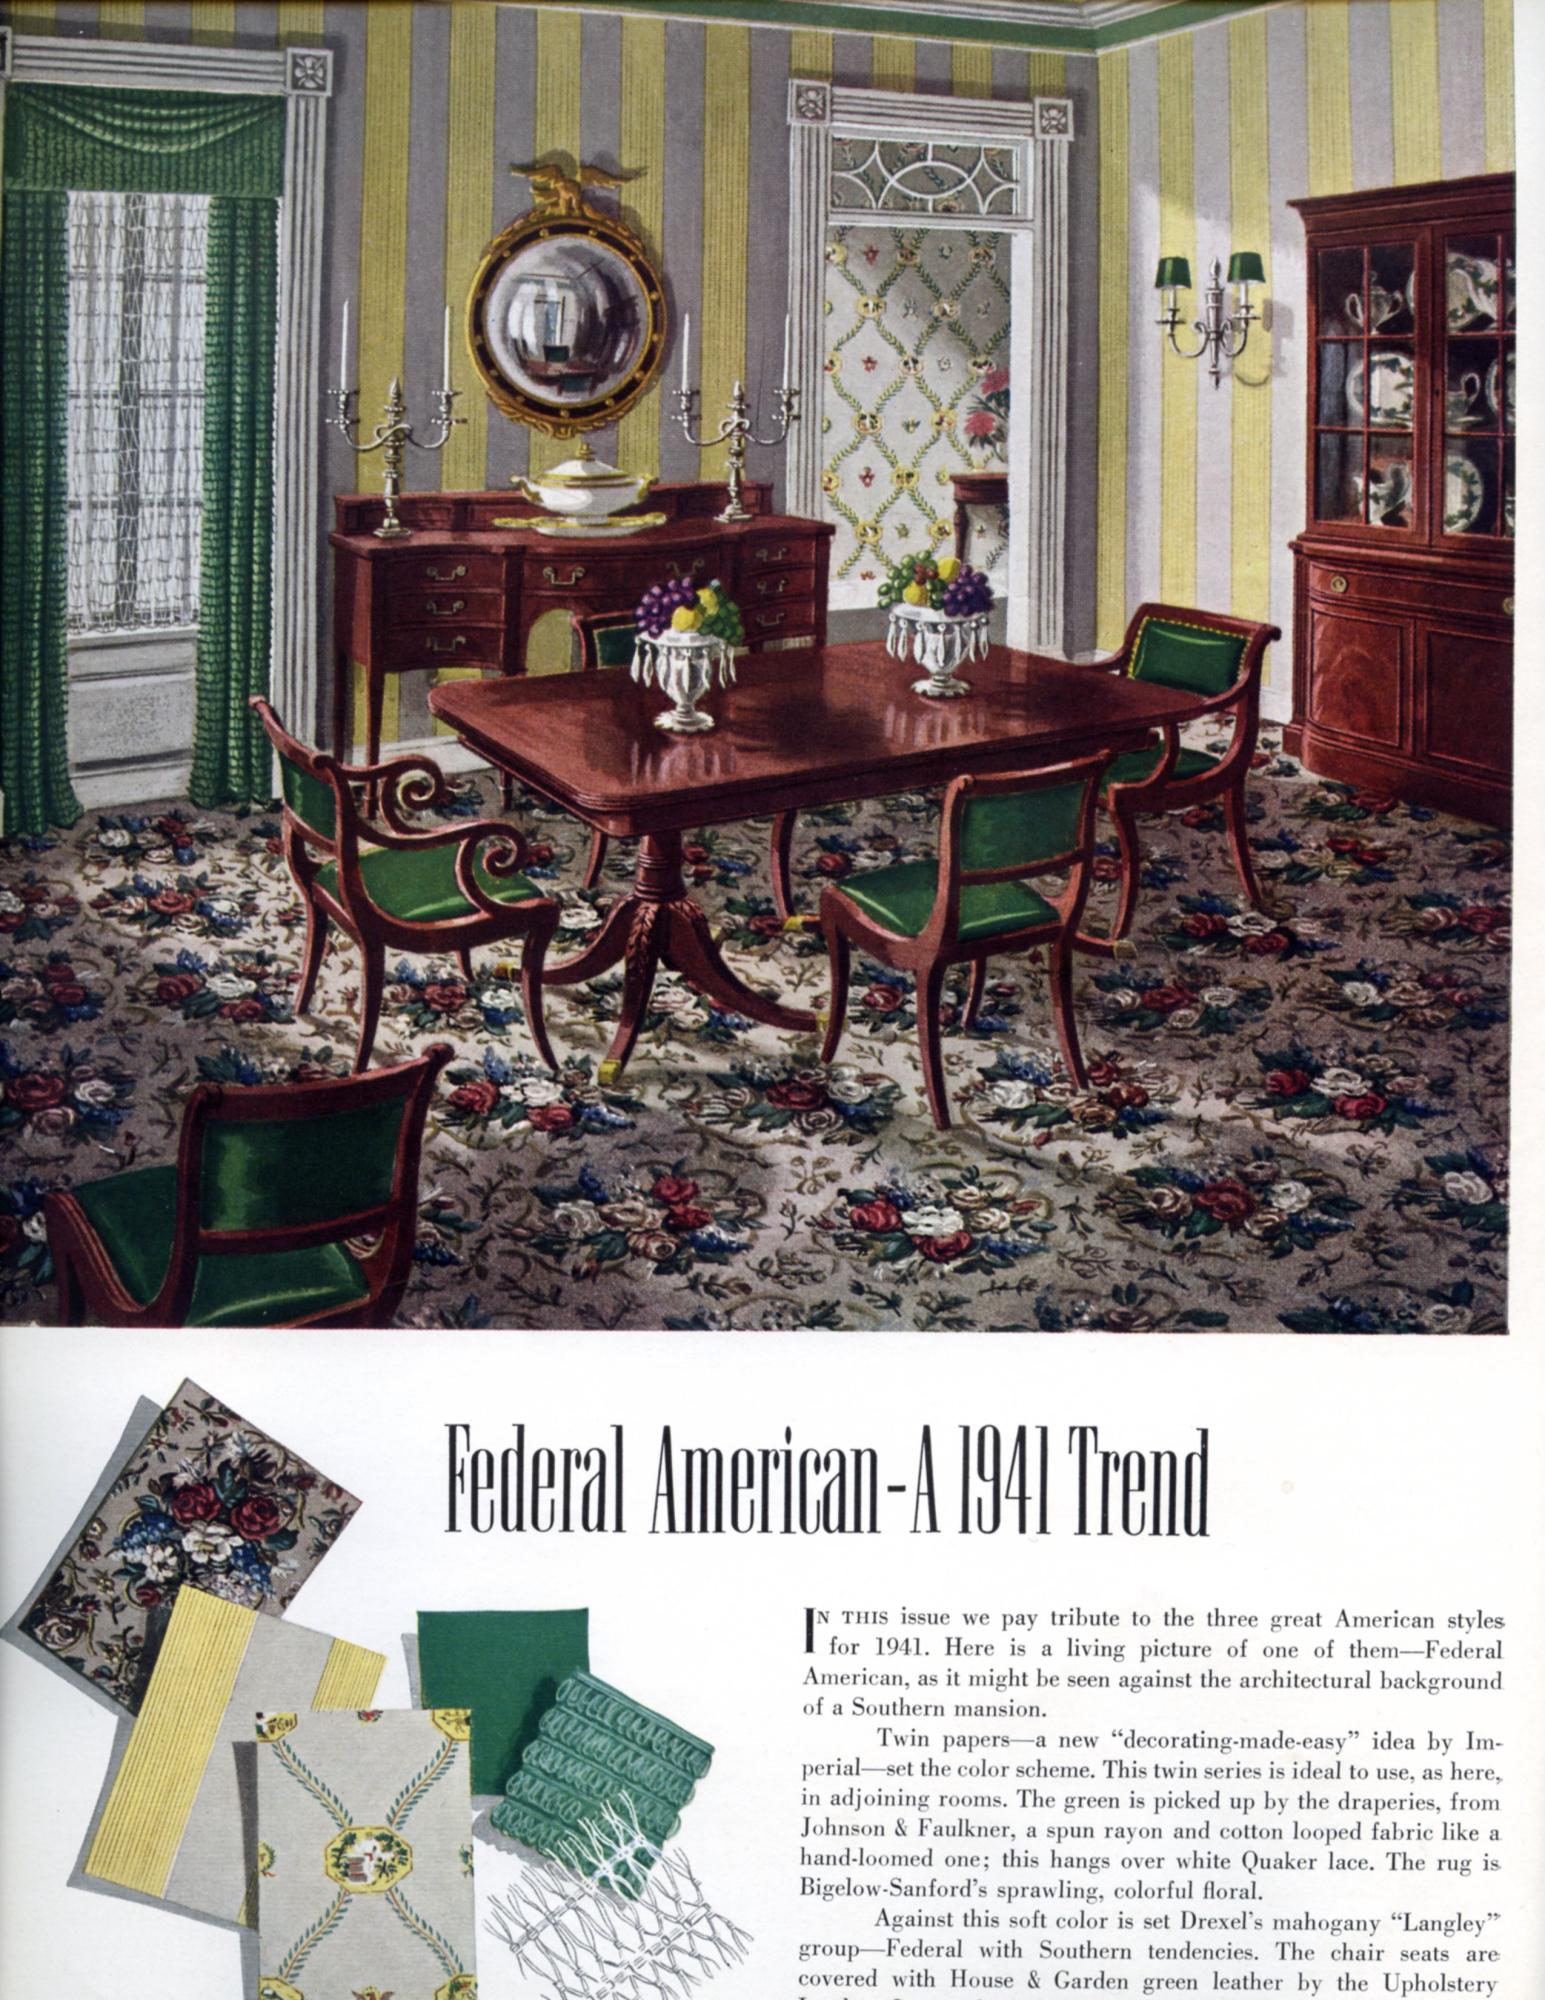 Magazine article titled Federal American-A 1941 Trend